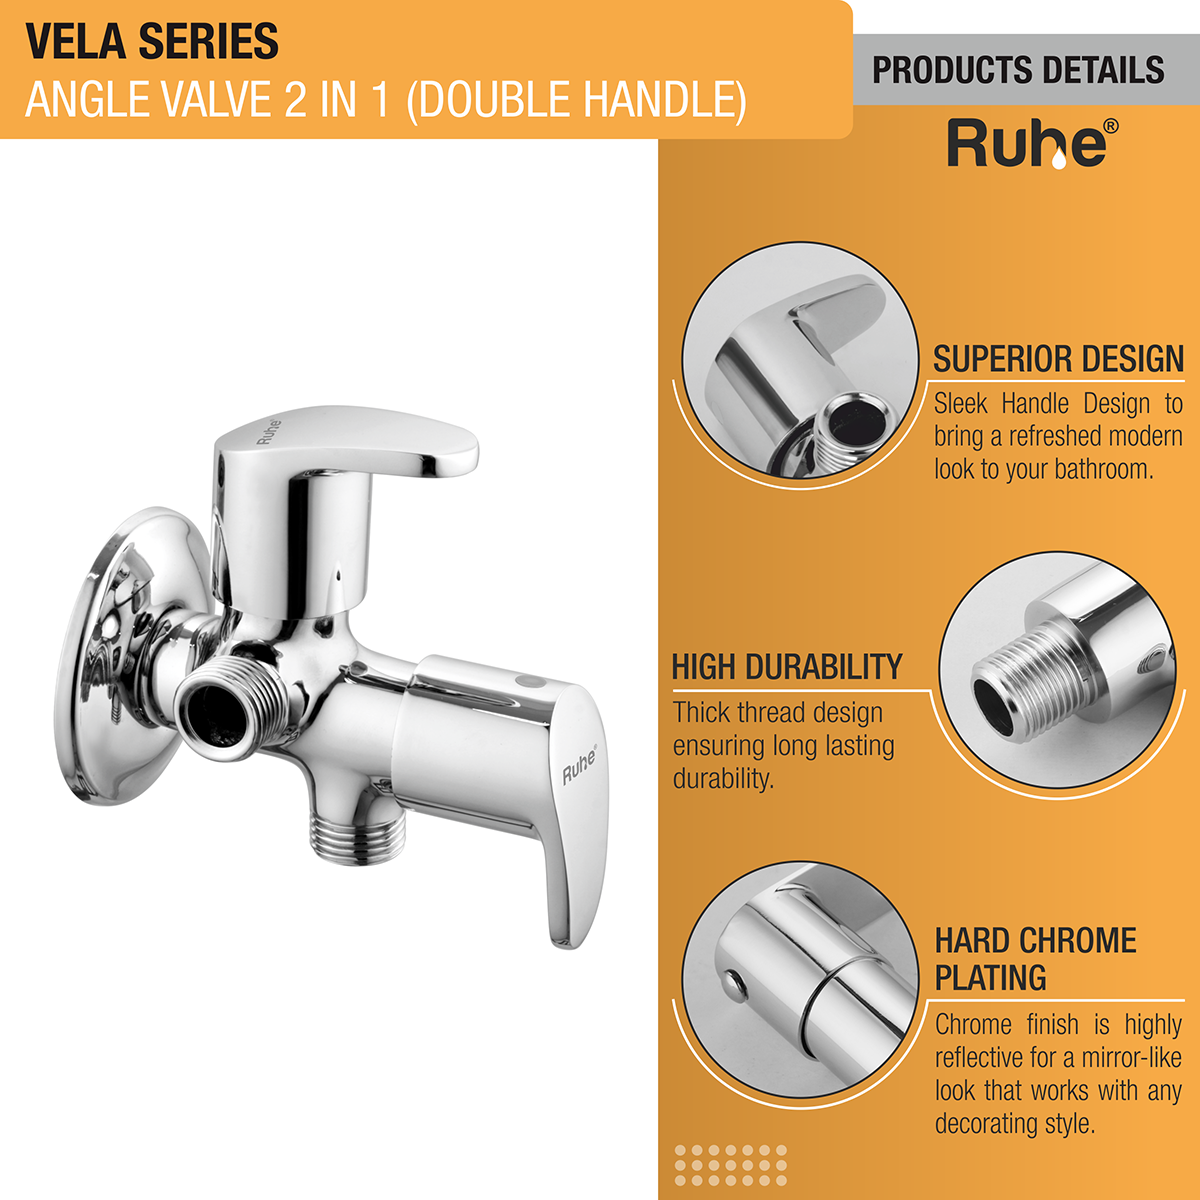 Vela Two Way Angle Valve Brass Faucet (Double Handle) product details